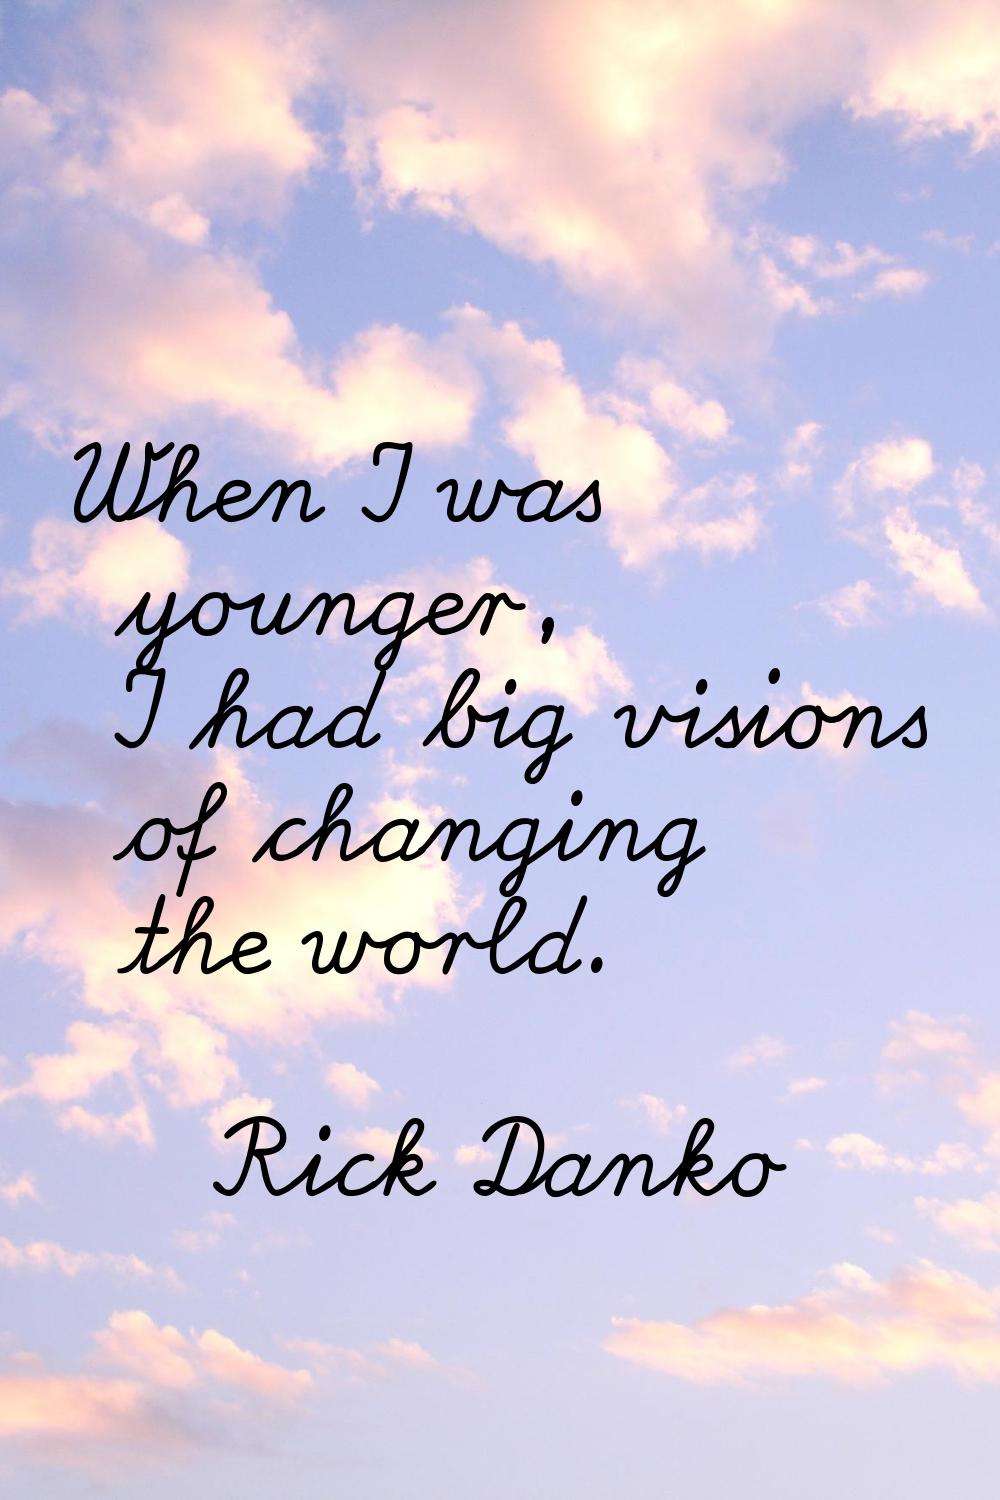 When I was younger, I had big visions of changing the world.